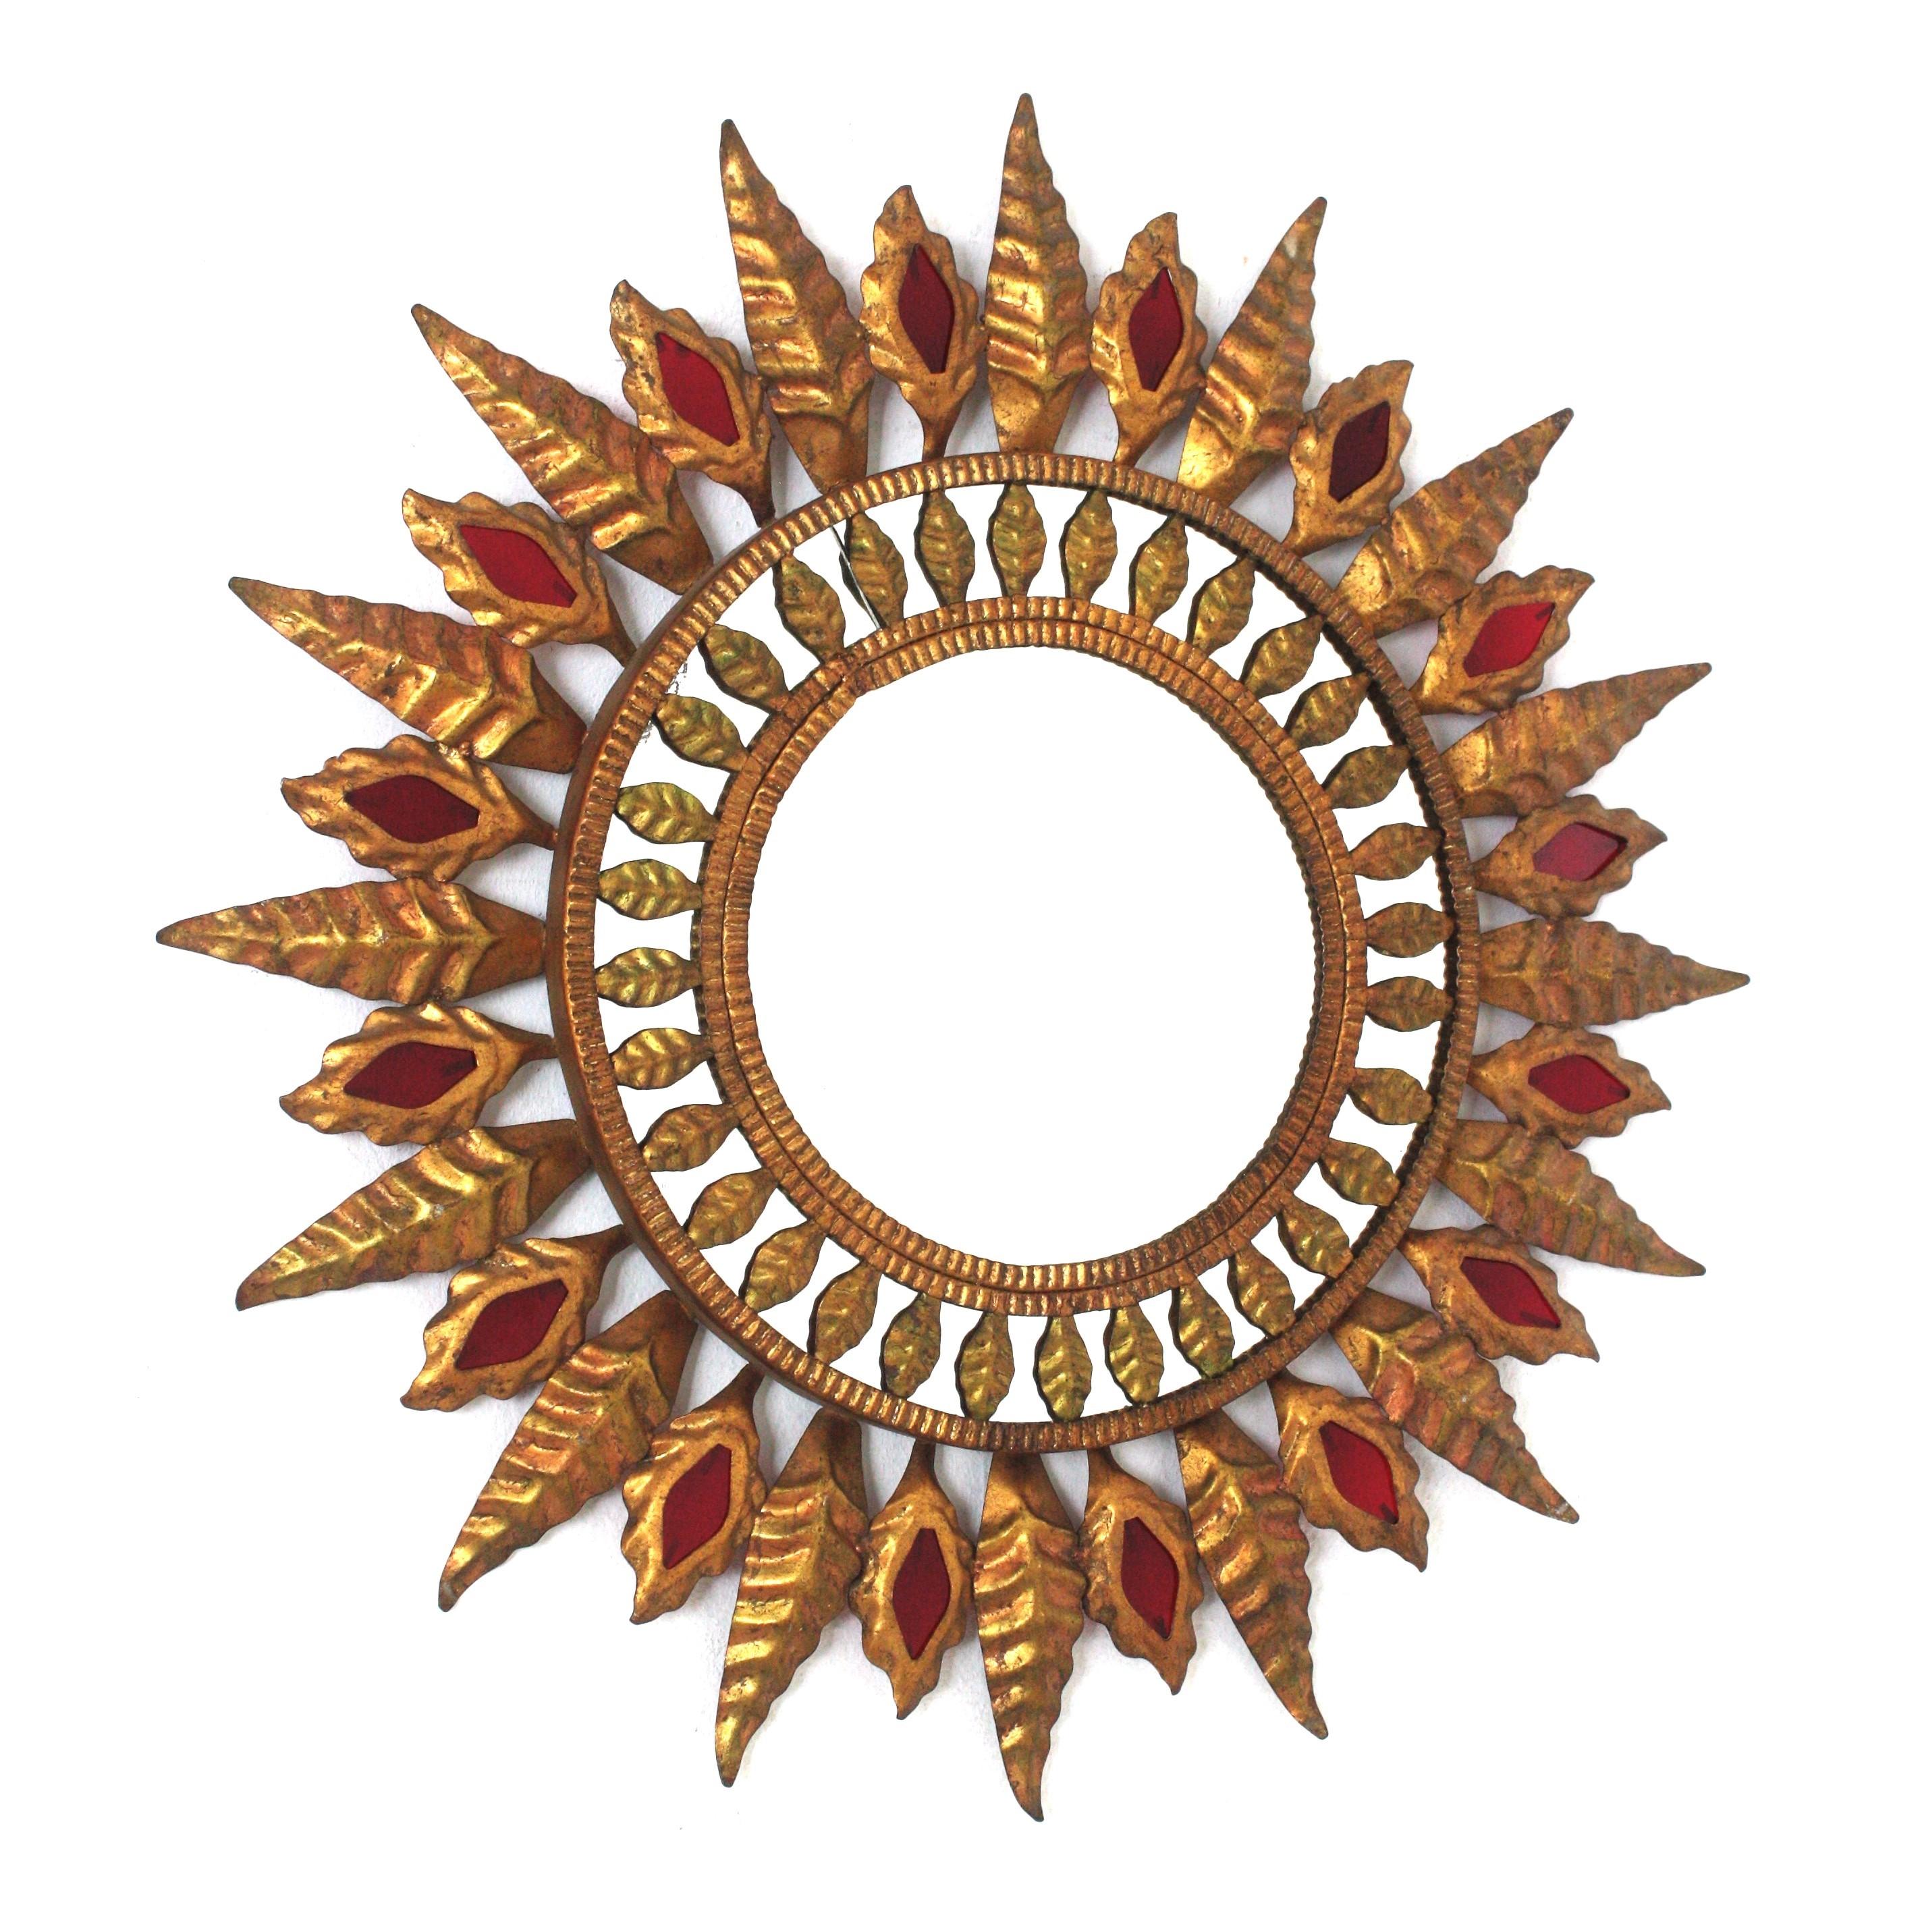 Sunburst Mirror in Gilt Iron and Red Glass, Spain, 1950s.
Eye-catching sunburst mirror featuring a mirrored surface surrounding the central glass, a frame with alternating large and small leaves and red glass accents. 
Nice aged patina and original